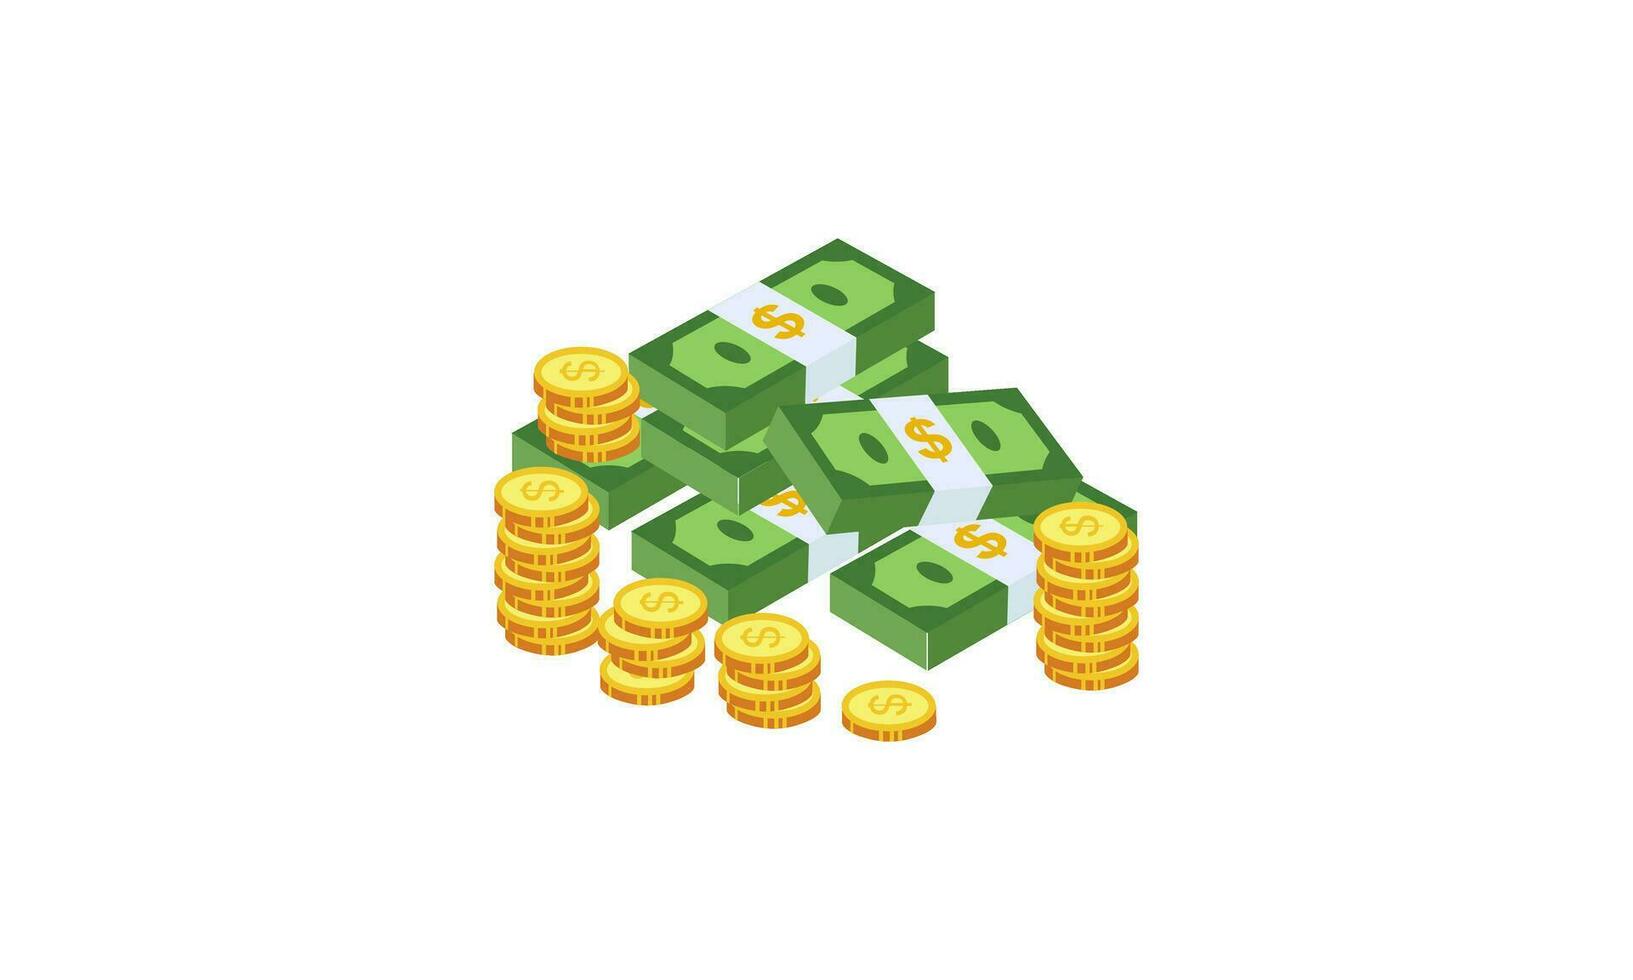 Big pile of cash money and some gold coins. Heap of packed dollar bills. This logo can be easily app vector